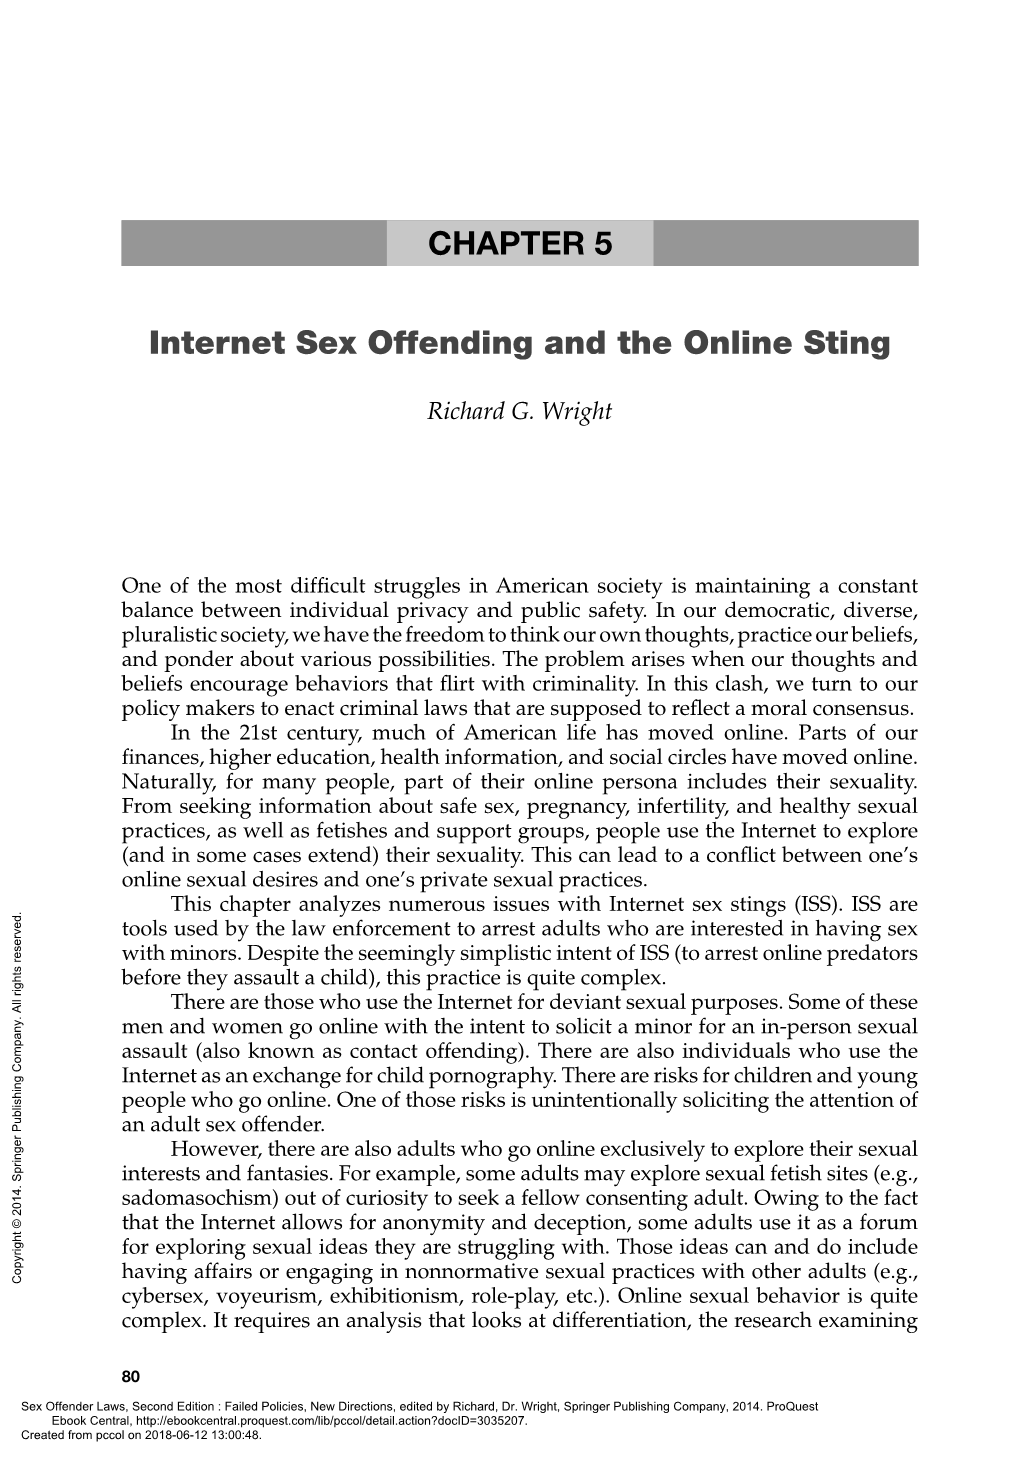 CHAPTER 4 CHAPTER 5 Internet Sex Offending and the Online Sting